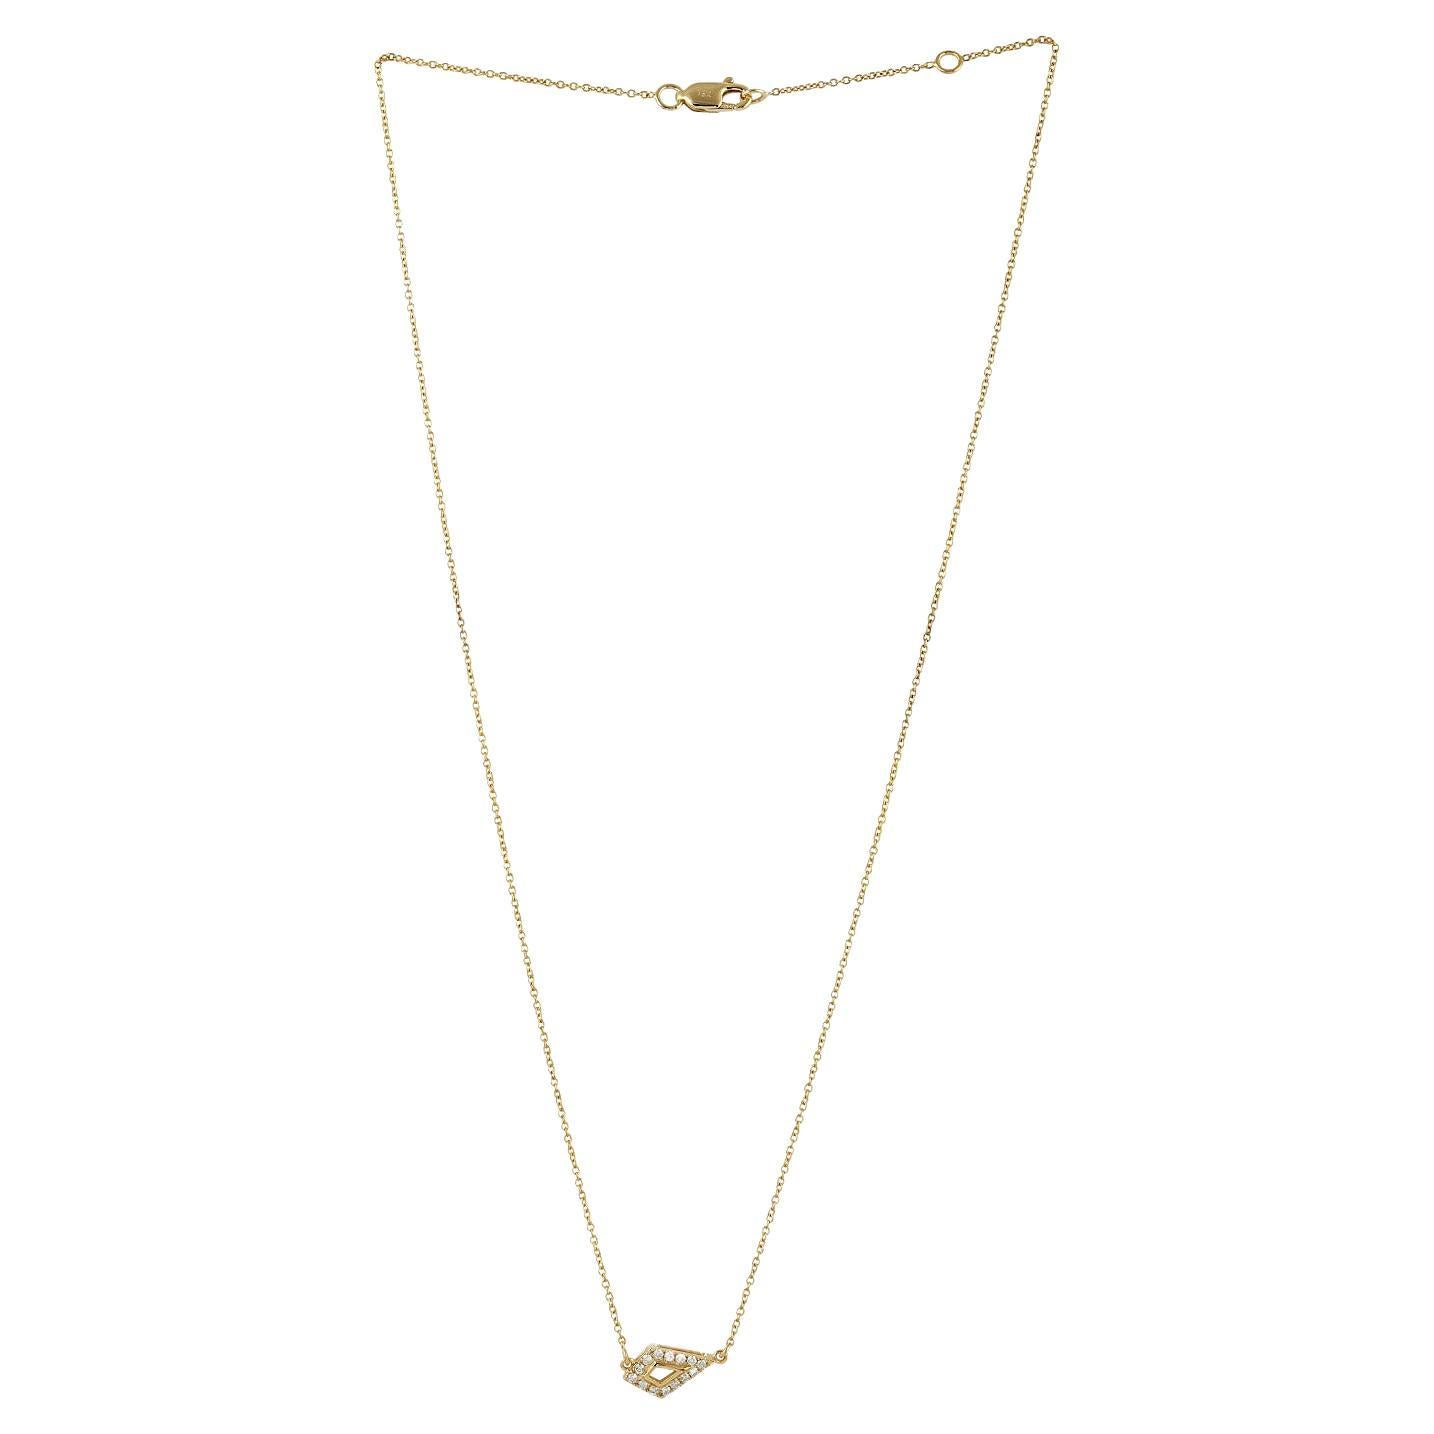 Gemotric Shaped Pave Diamond Pendant Chain Necklace Made In 18k Yellow Gold